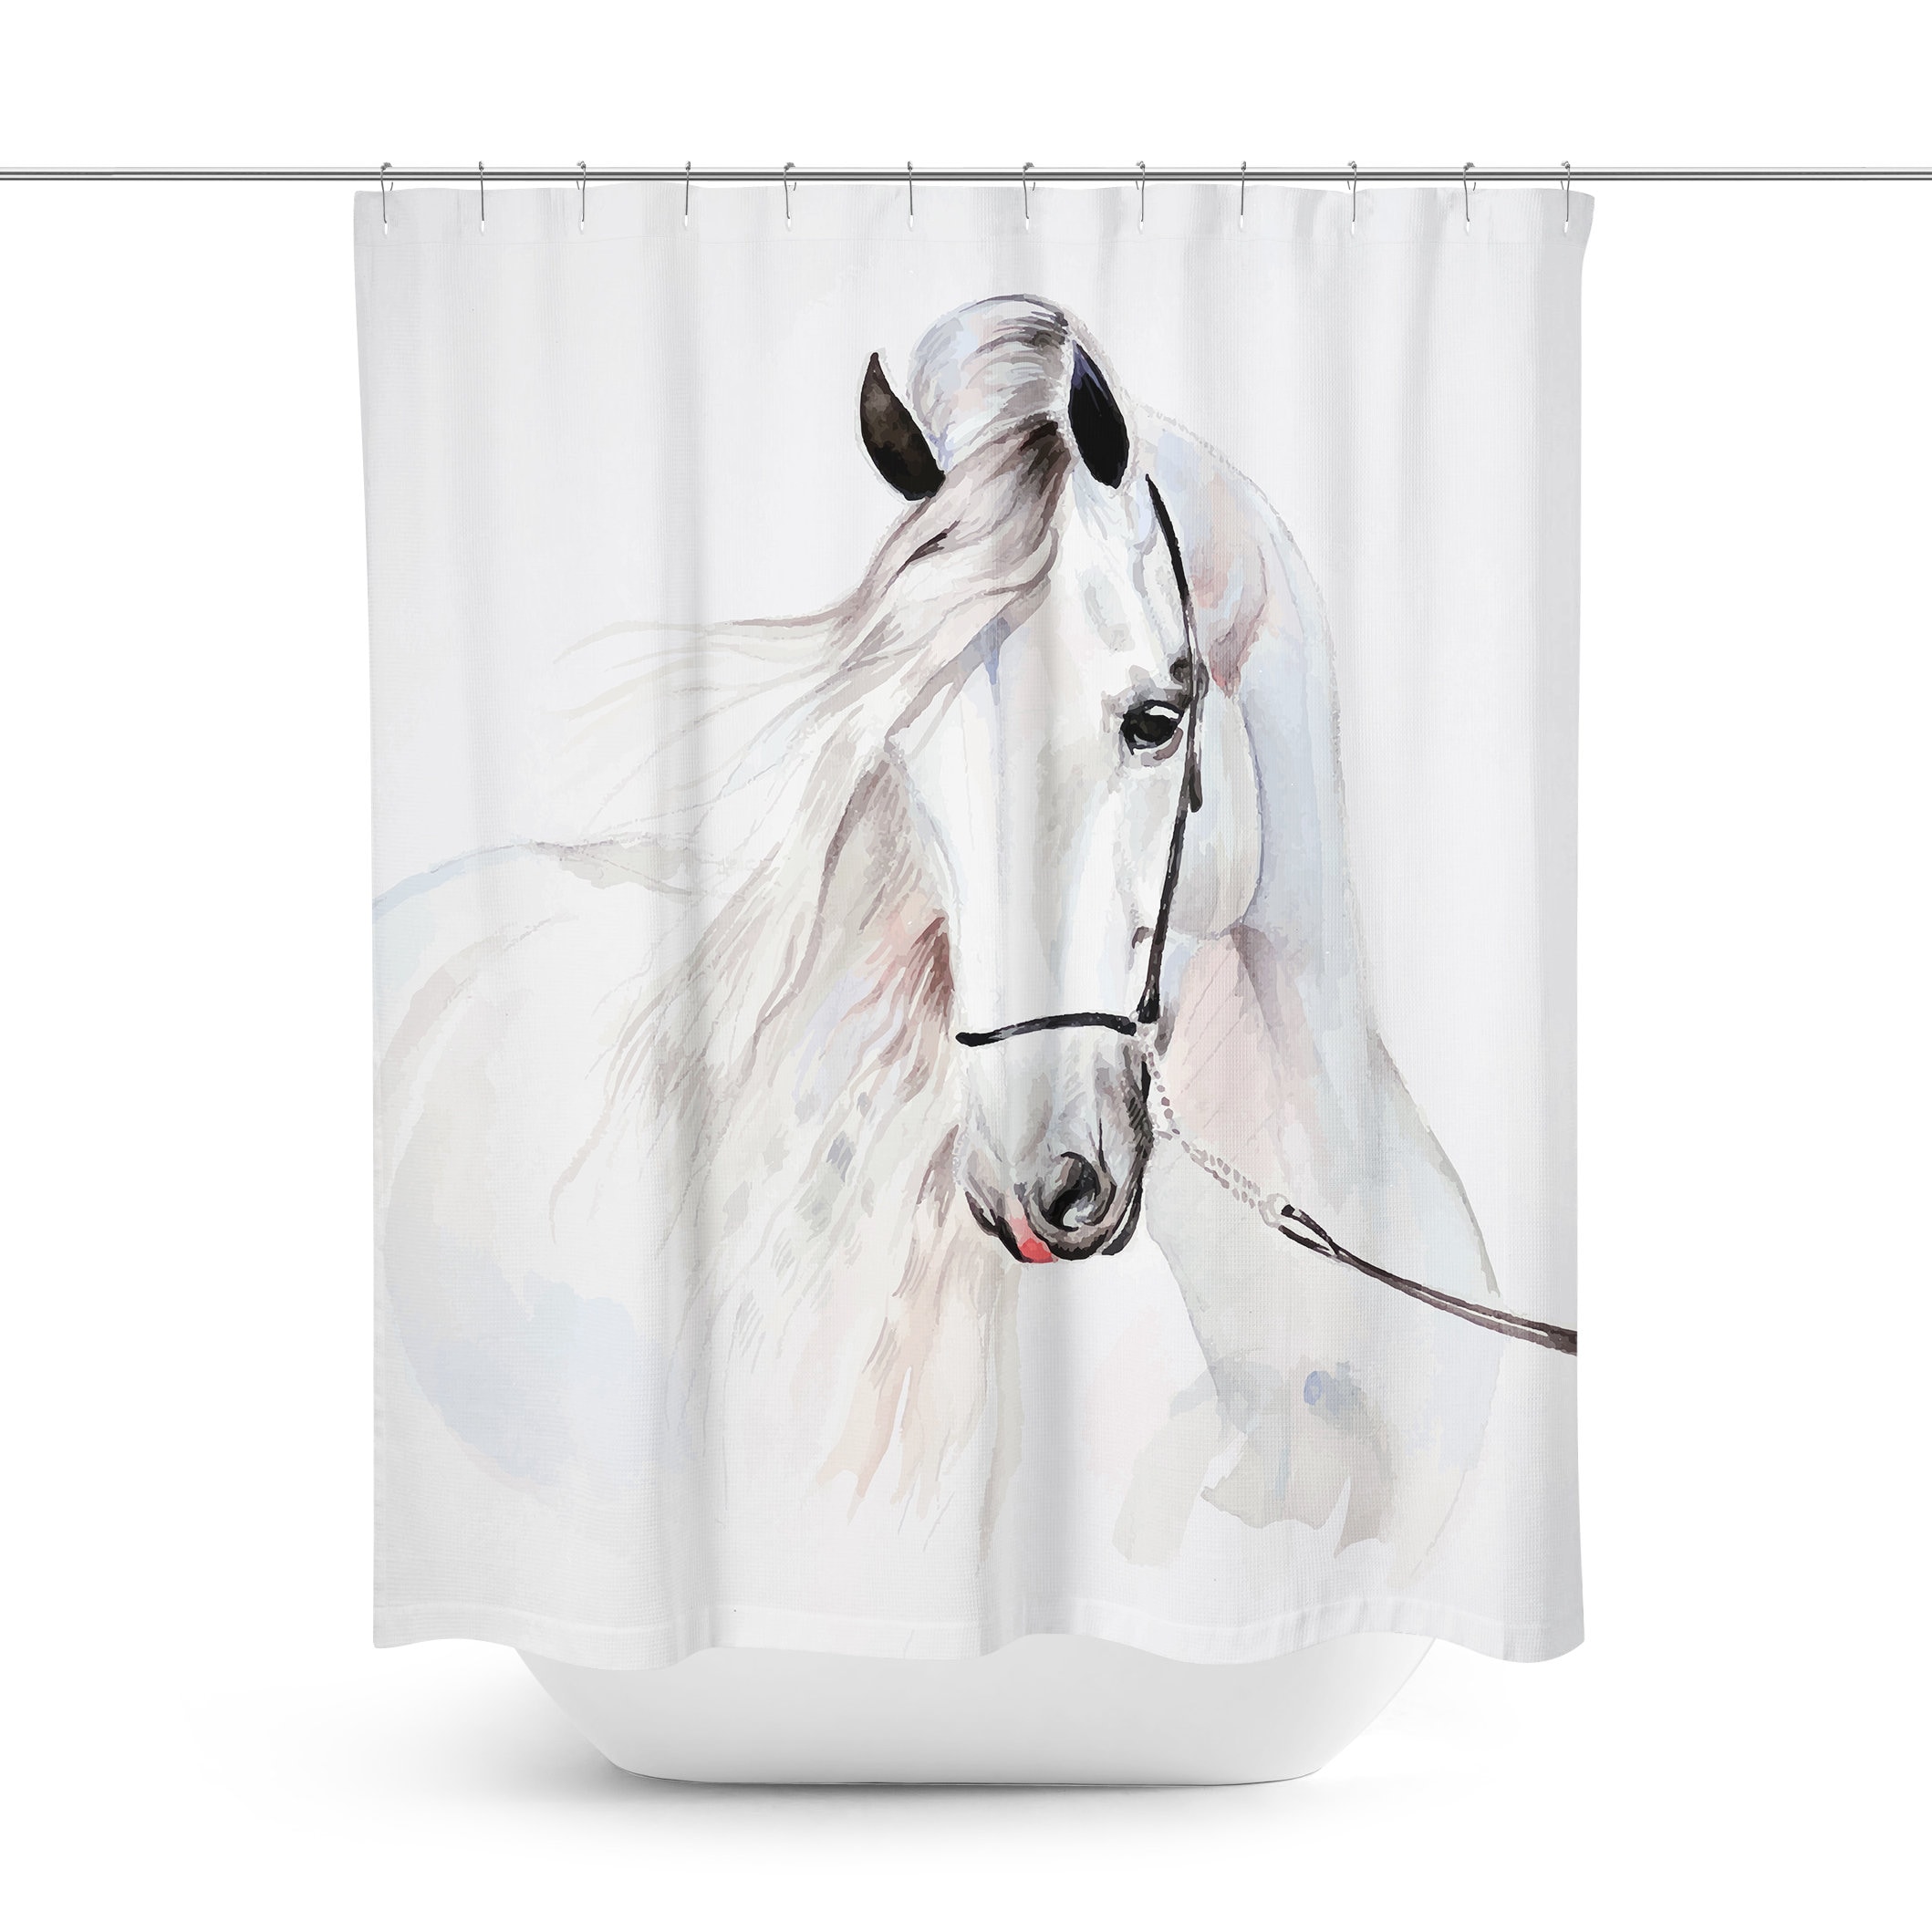 Galloping Horses Shower Curtain 